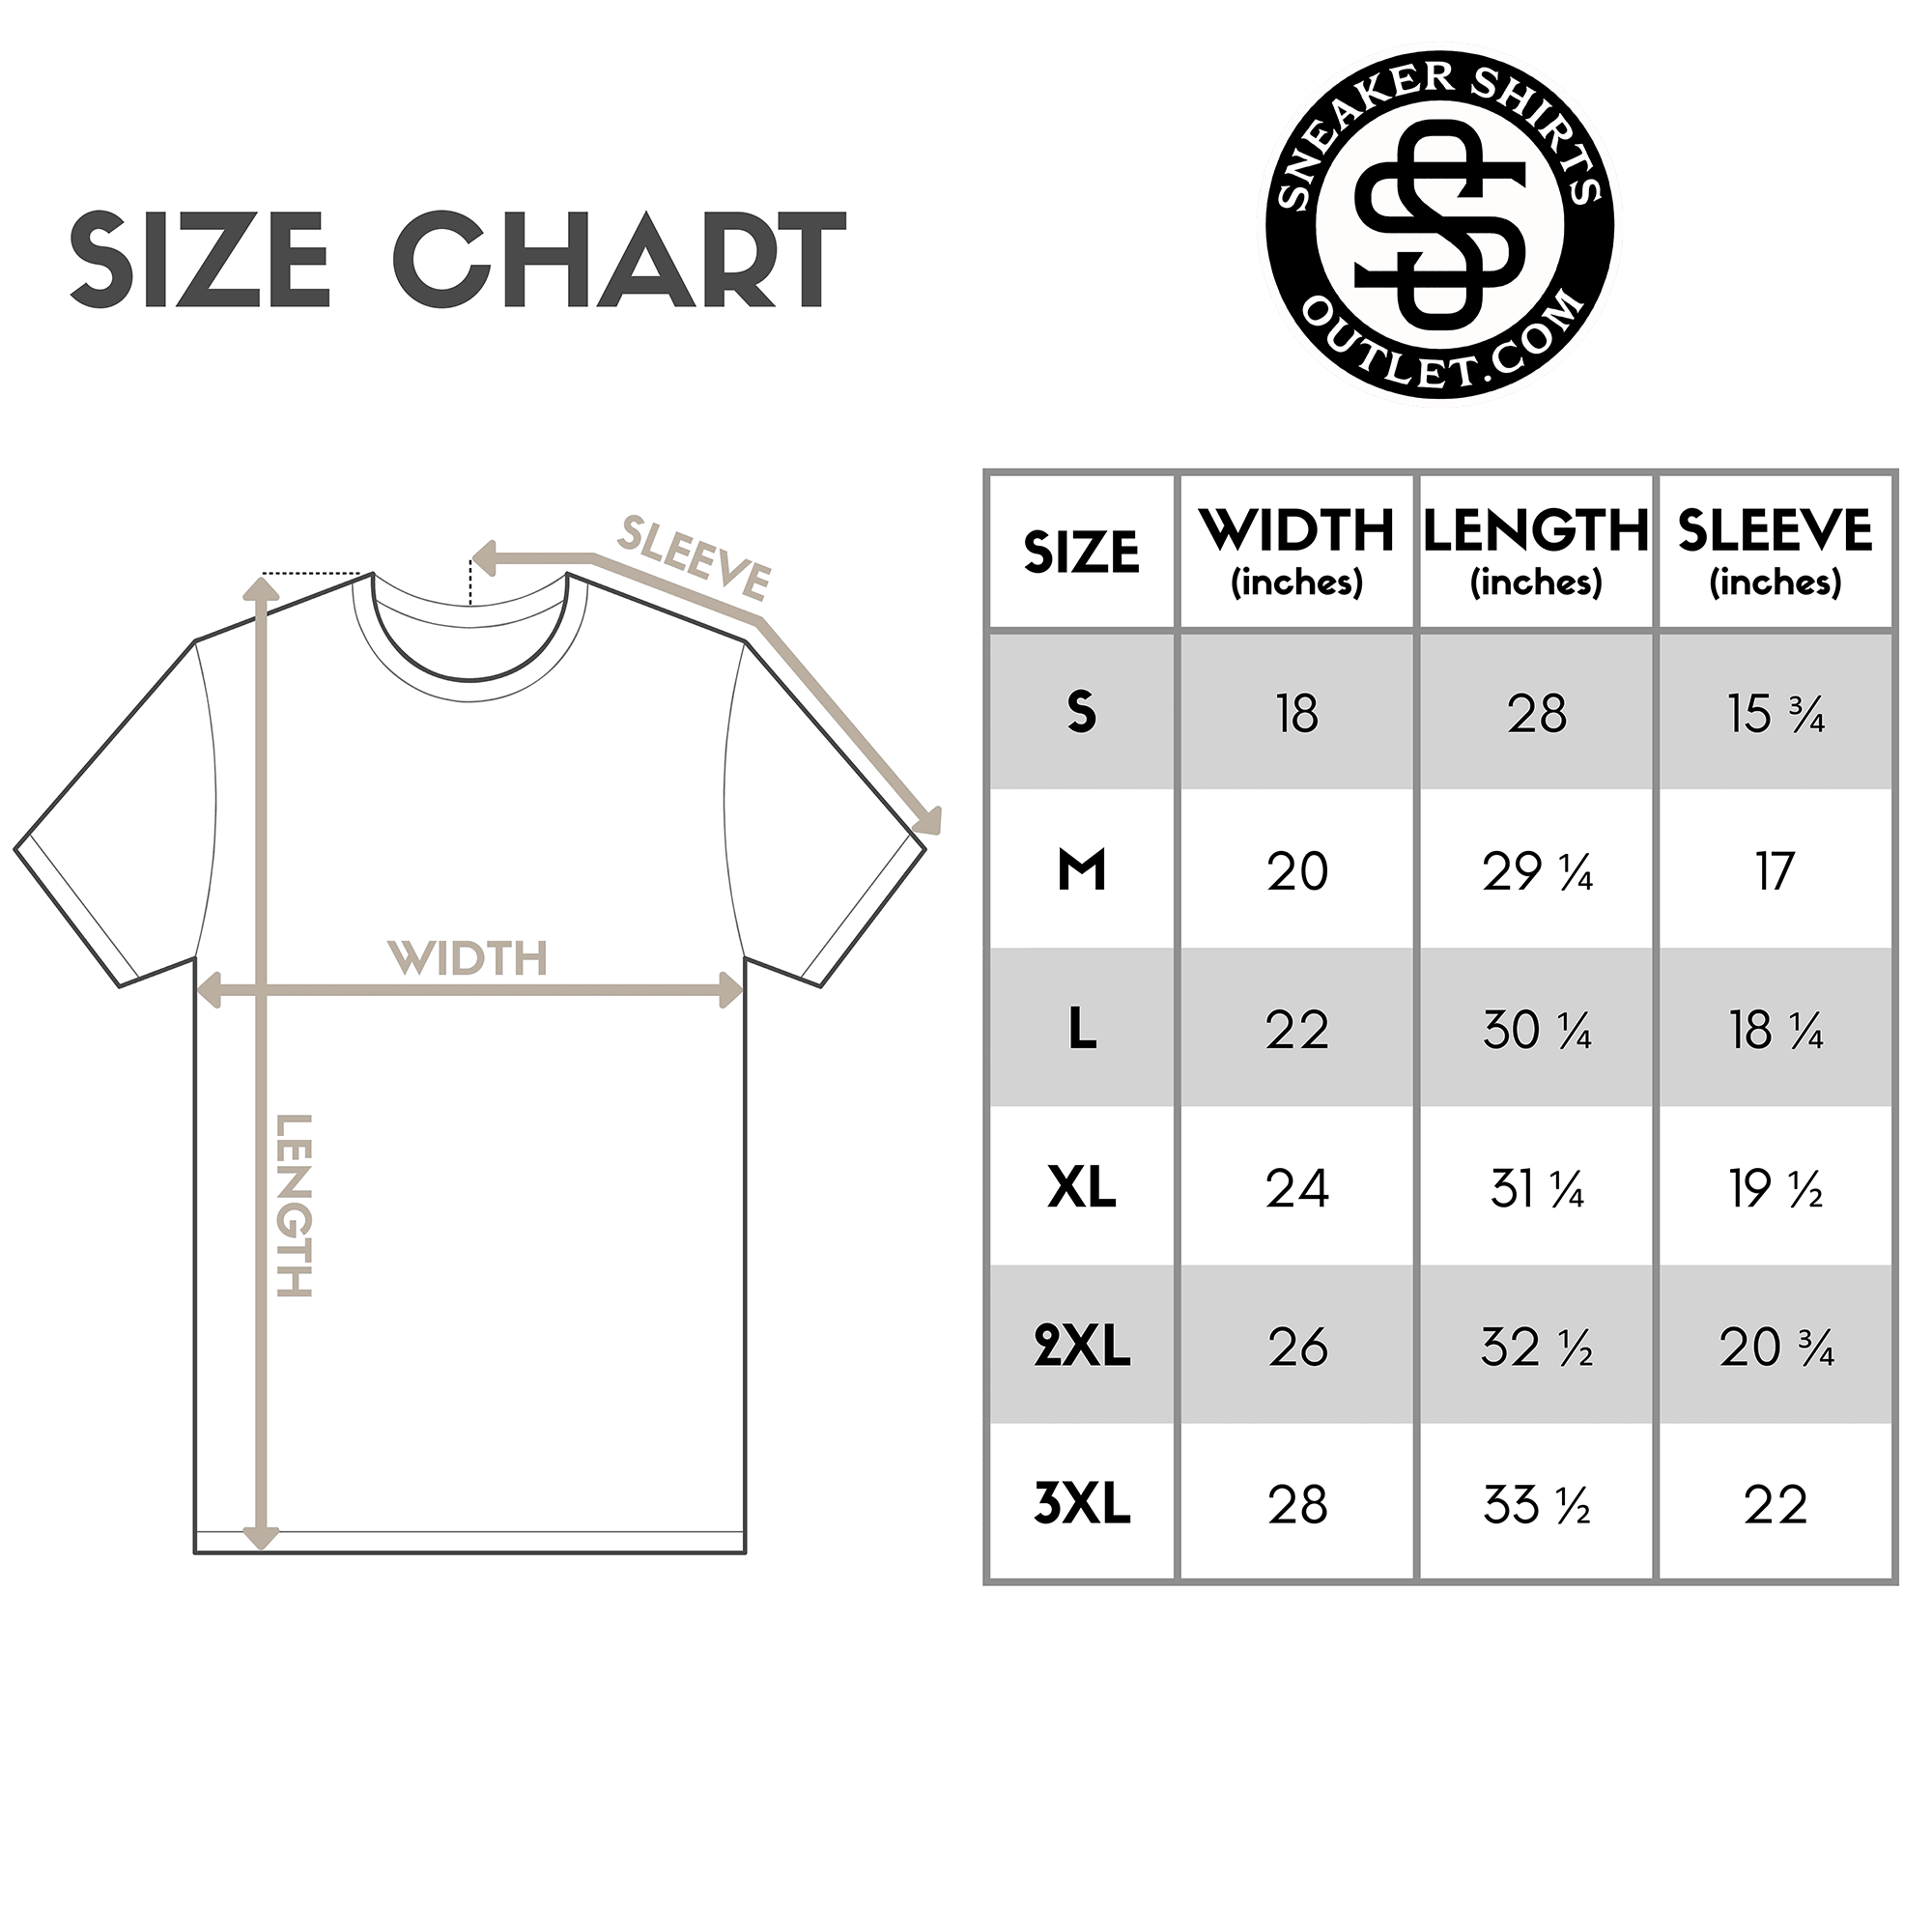 H Is For Hustle Shirt retro size chart photo